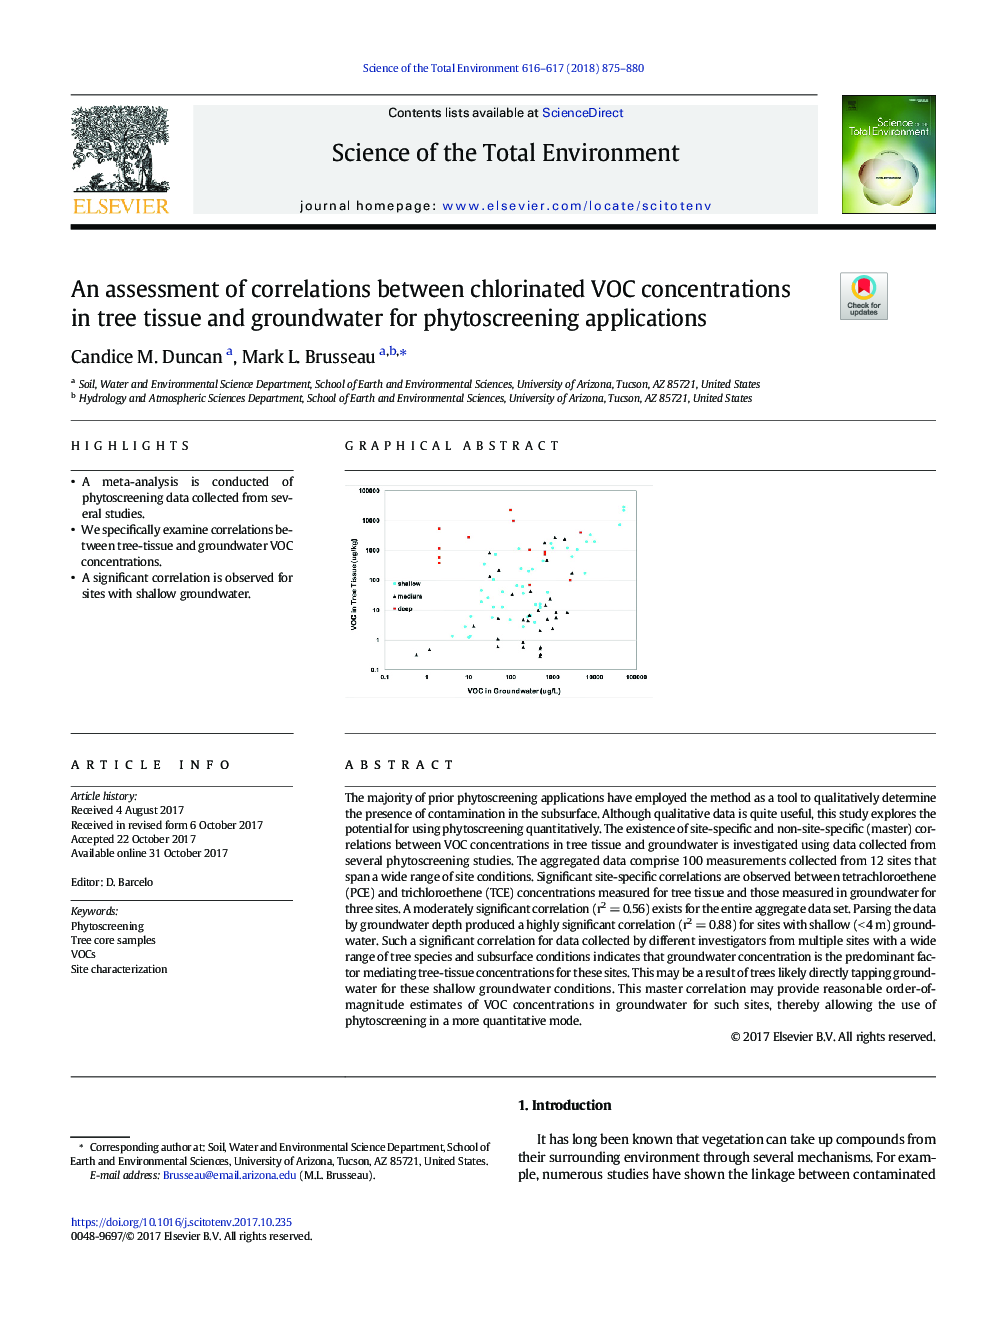 An assessment of correlations between chlorinated VOC concentrations in tree tissue and groundwater for phytoscreening applications